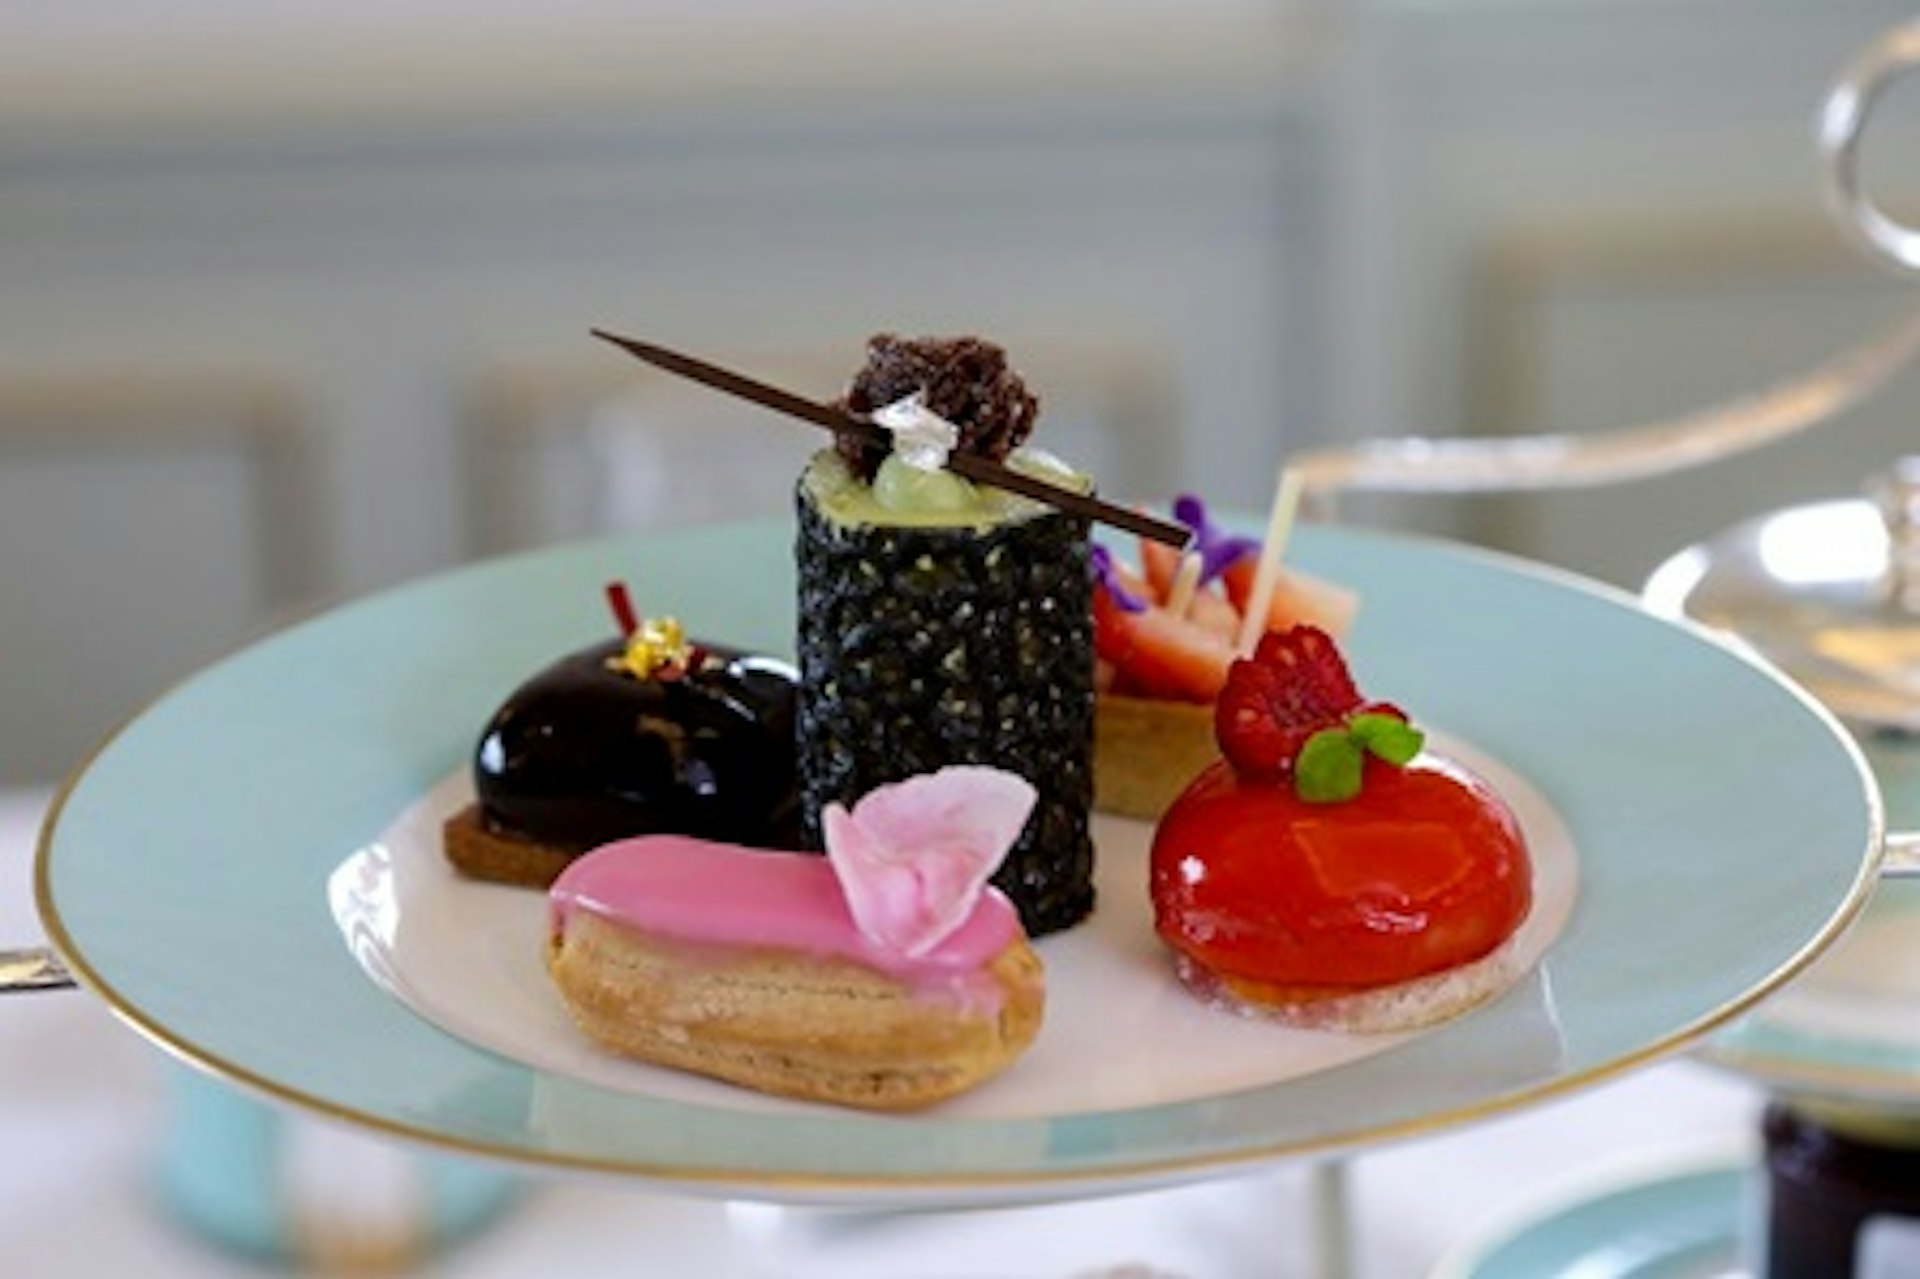 Fortnum & Mason Champagne Afternoon Tea for Two in The Diamond Jubilee Tea Salon 2